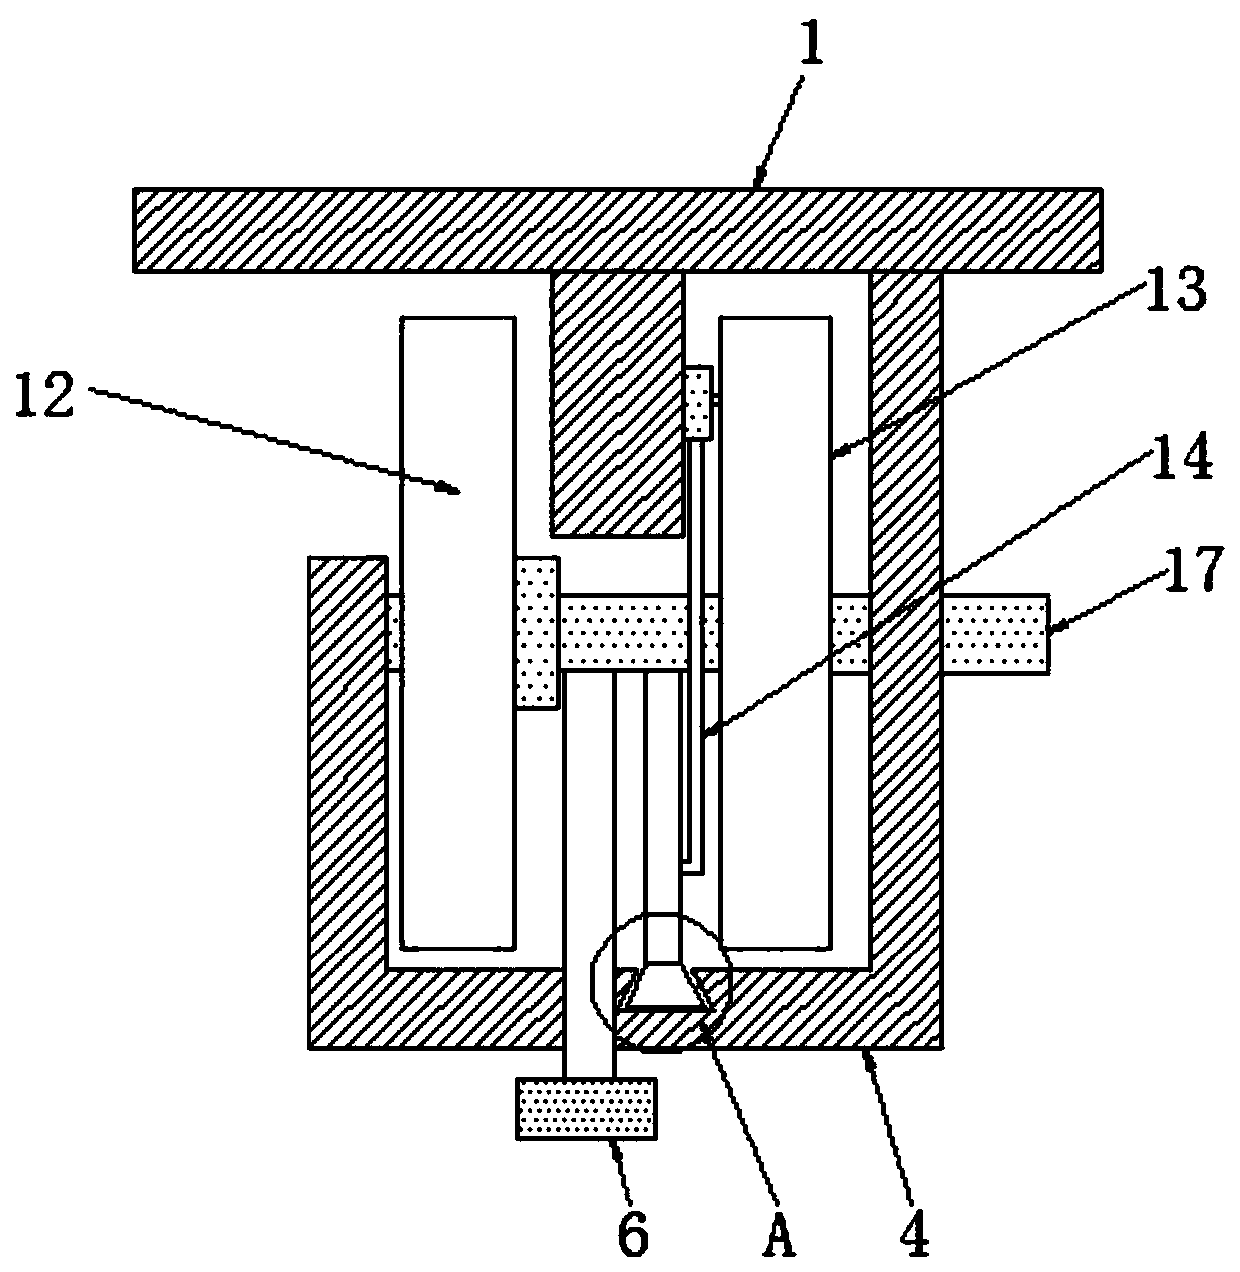 Tea cake making device capable of continuously working and preventing edges from being damaged